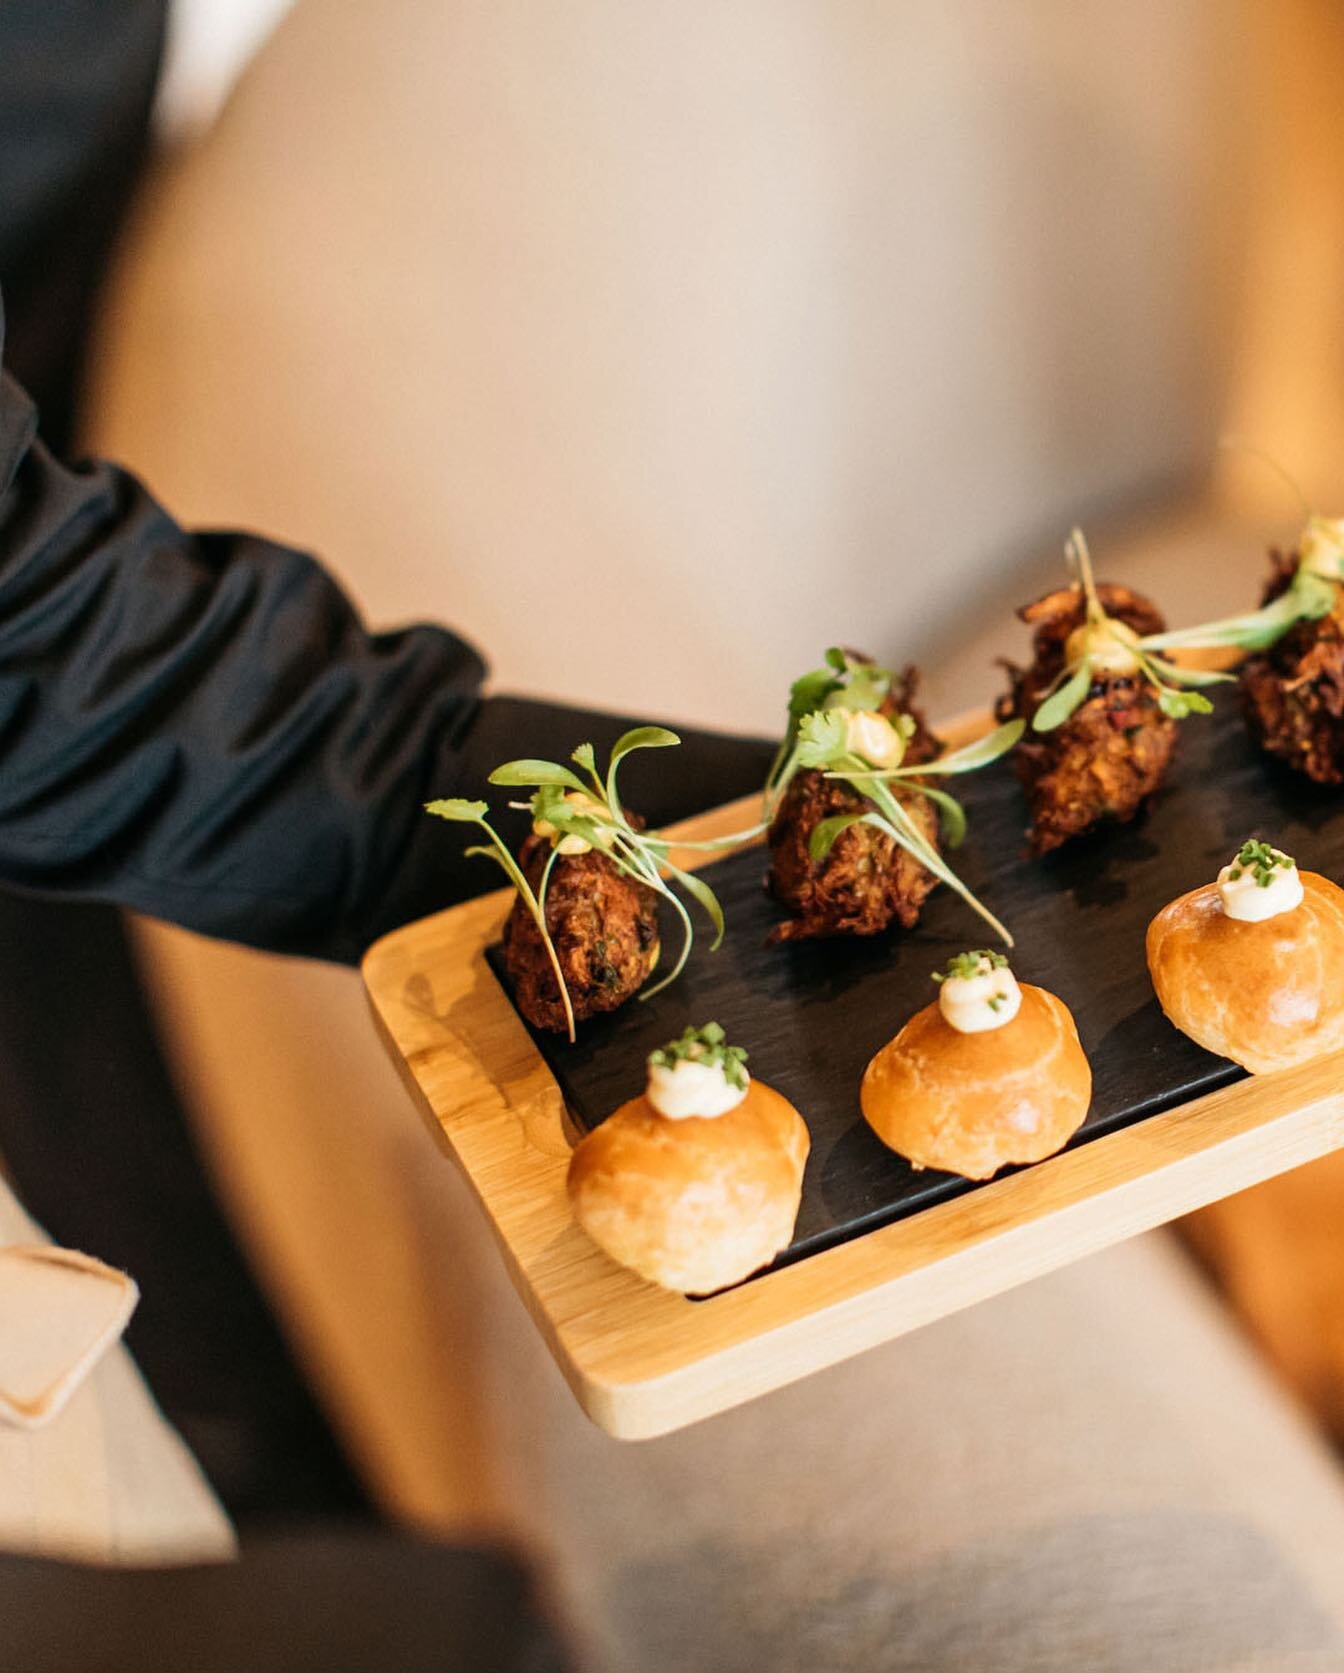 Our Head Chef Alex Burtenshaw and the team recently served up a delicious assortment of canap&eacute;s for an event at Port:&nbsp;
&nbsp;
- Salmon, seaweed &amp; lemon fishcake with chilli jam&nbsp;
&nbsp;
- Free-range Arlington chicken liver parfait